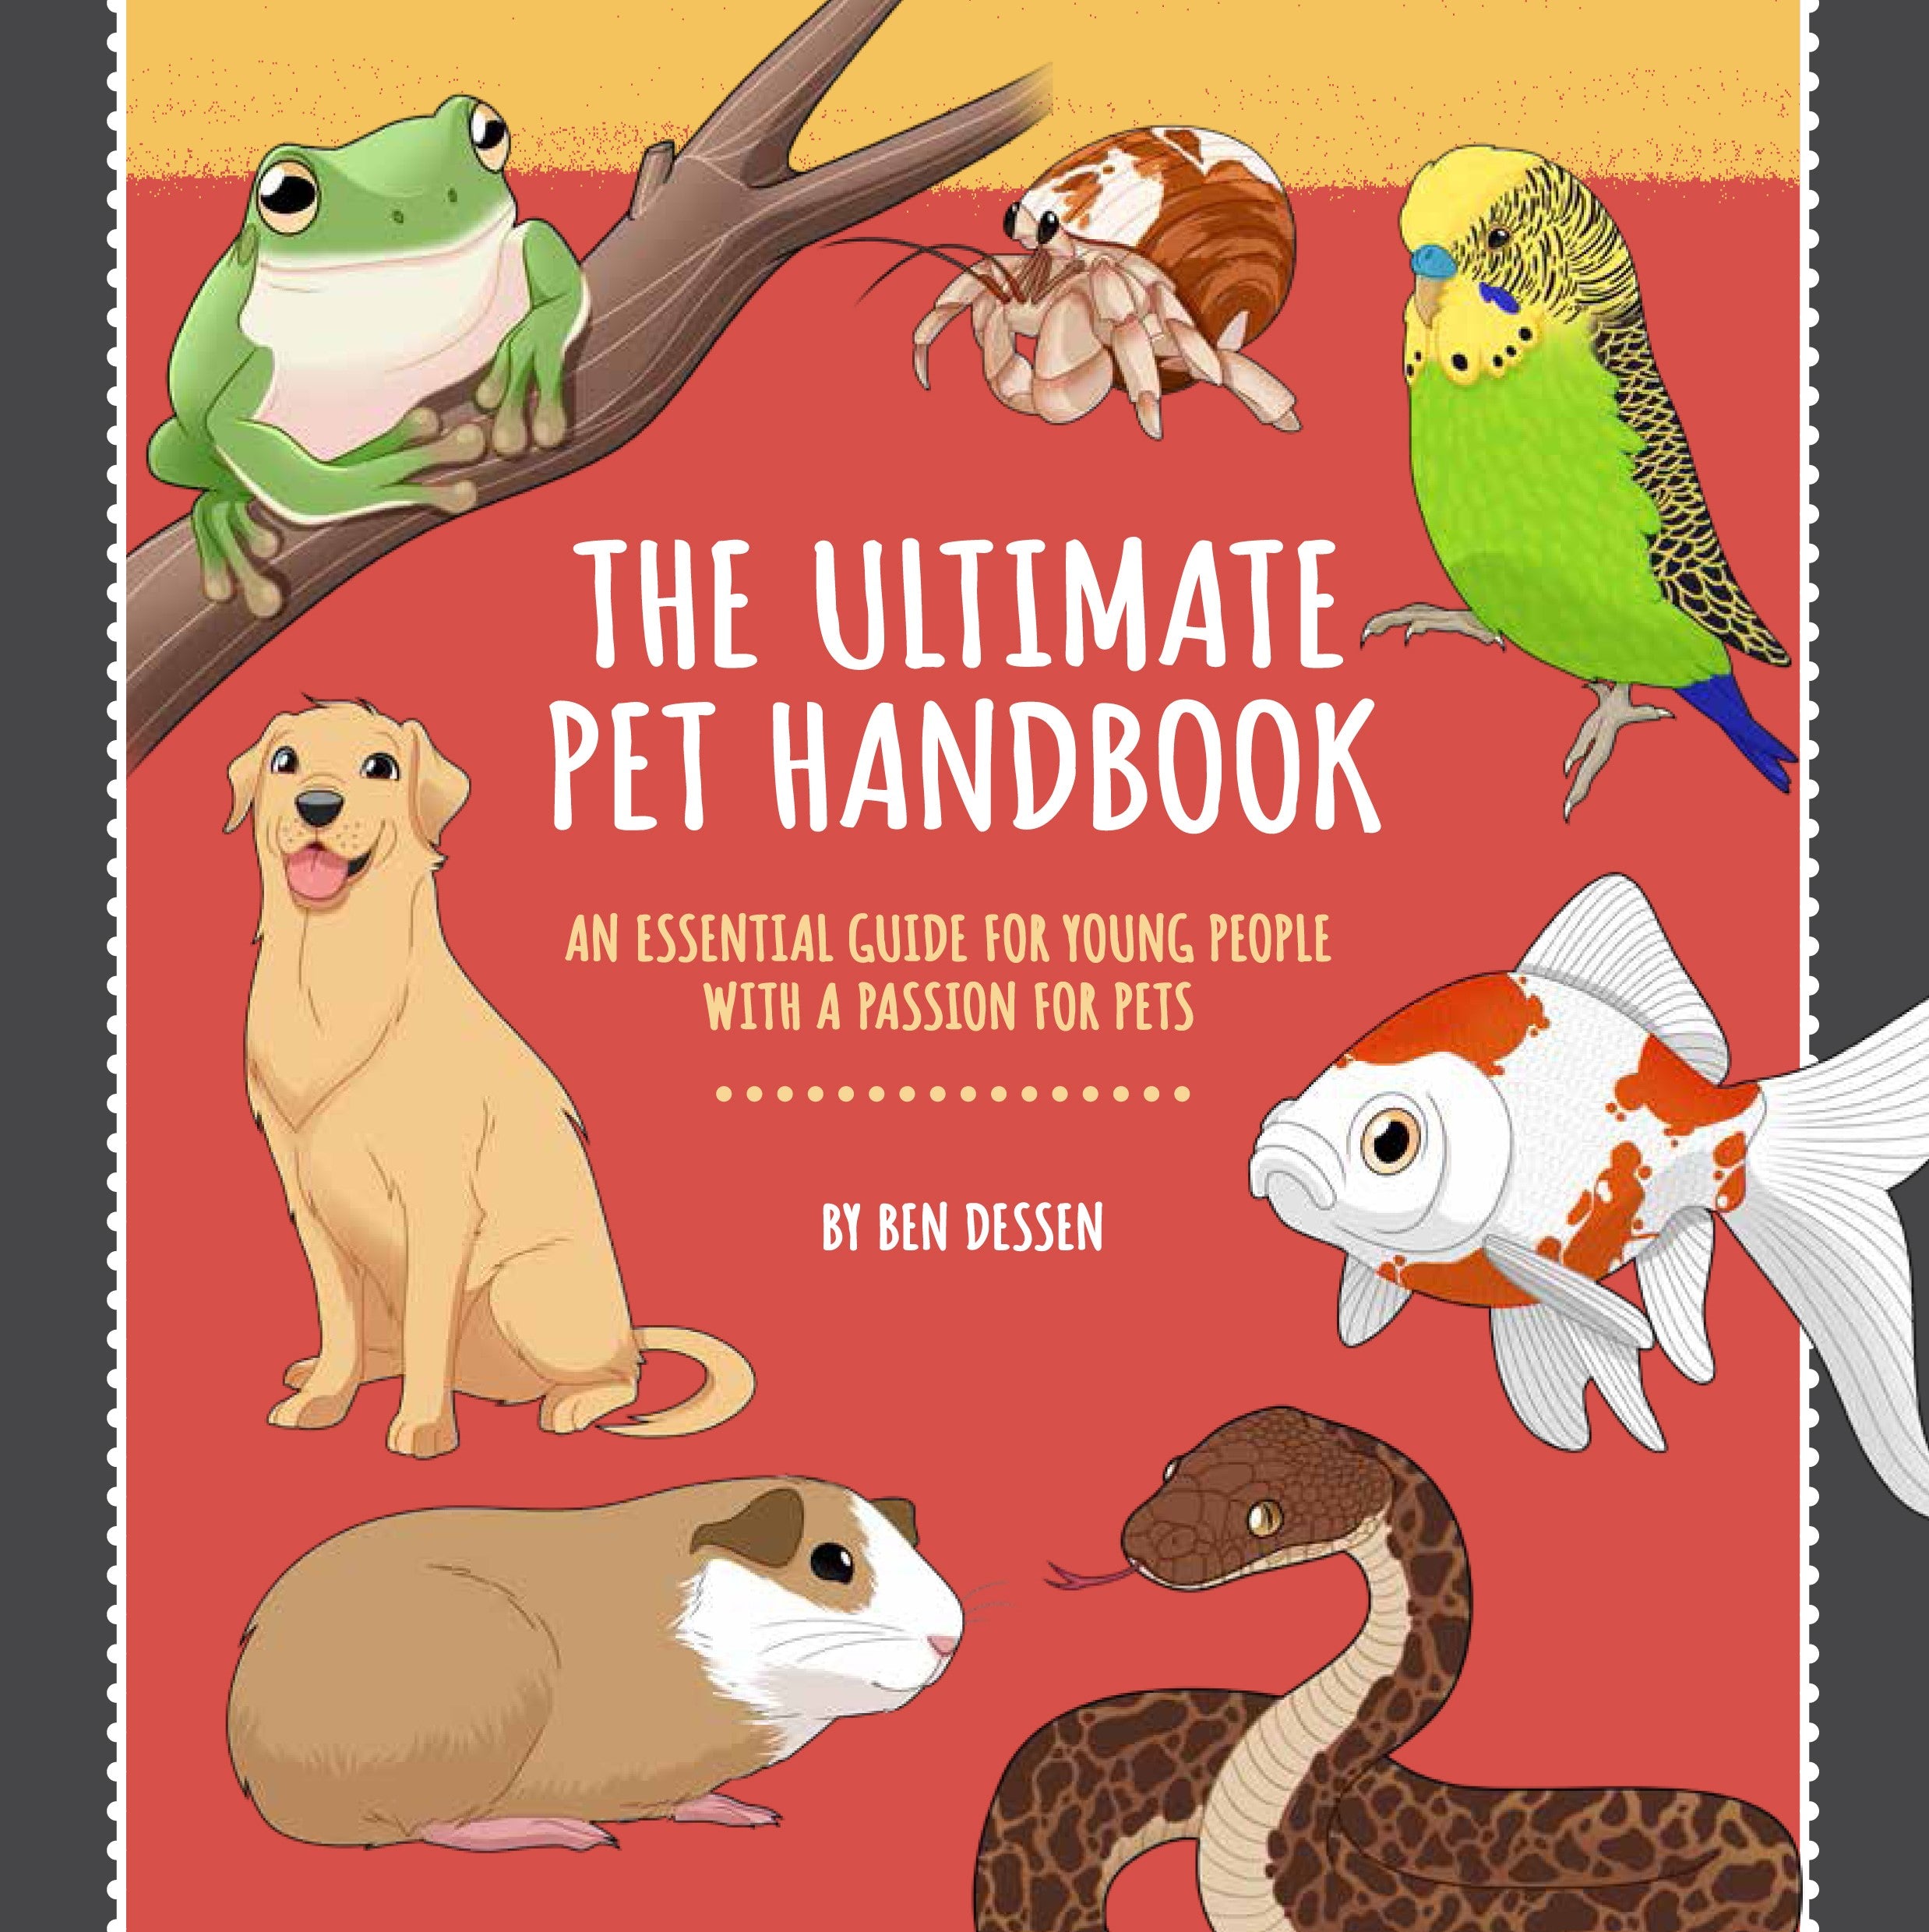 The Ultimate Pet Handbook—An Essential Guide for Young People With A Passion For Pets